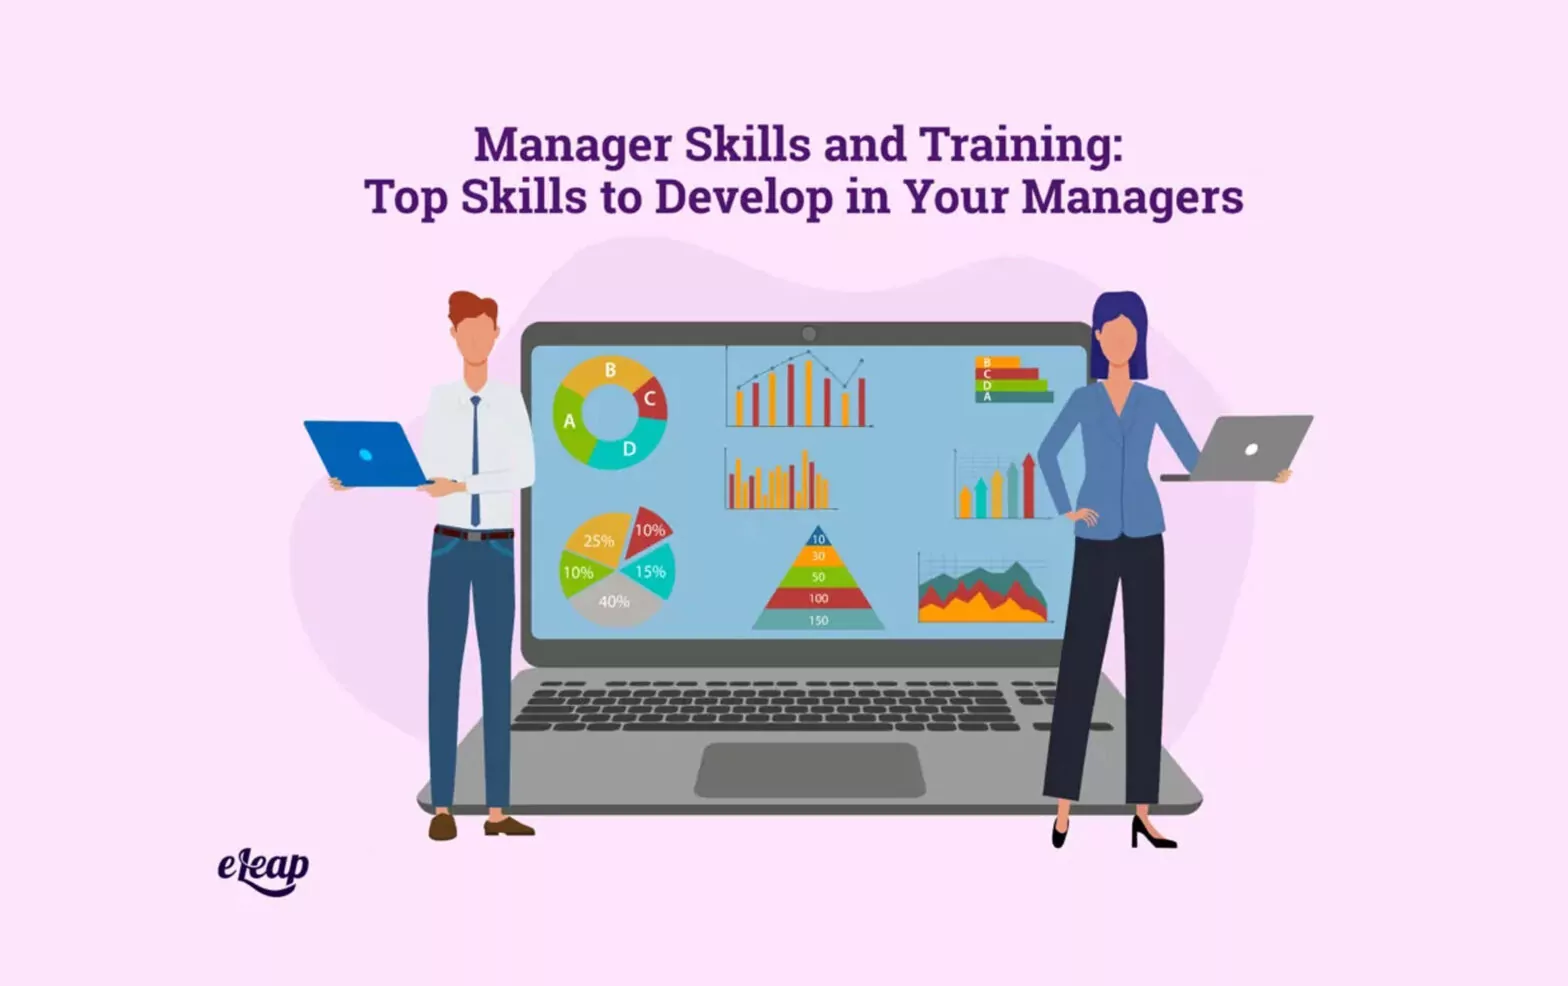 Manager Skills and Training: Top Skills to Develop in Your Managers